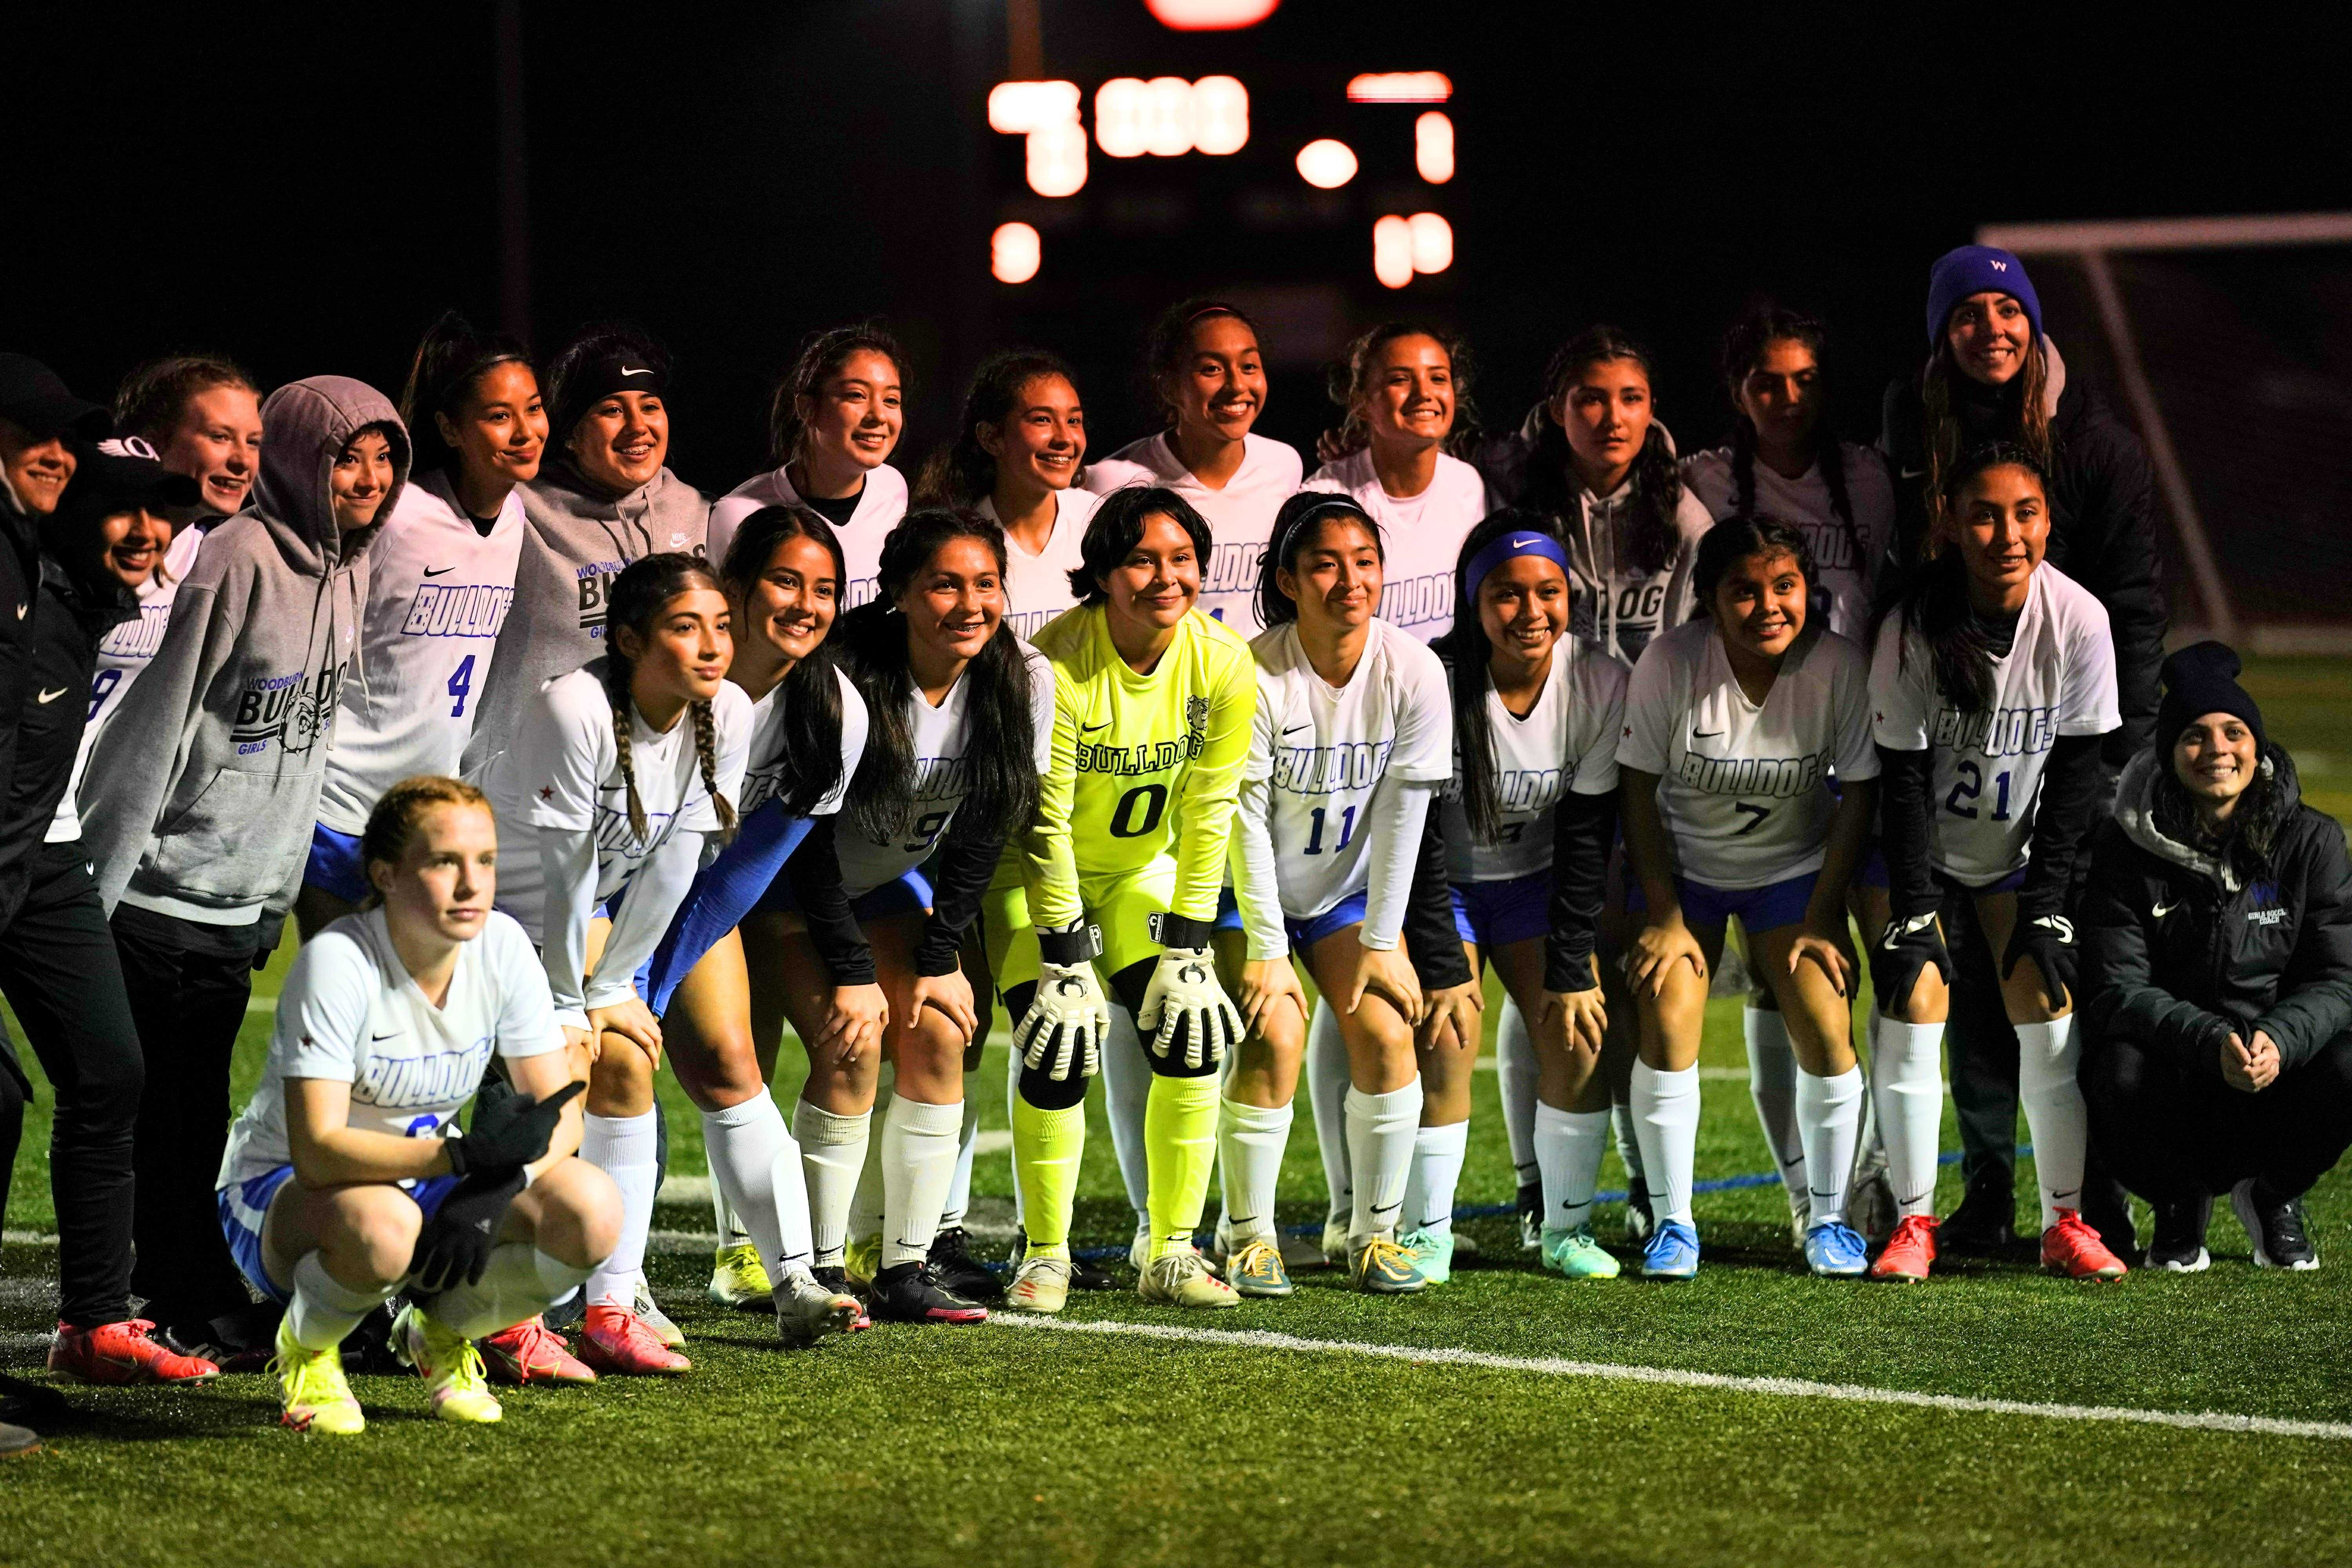 Woodburn's girls soccer team poses after winning 1-0 at Gladstone in a 4A semifinal Tuesday night. (Photo by Jon Olson)